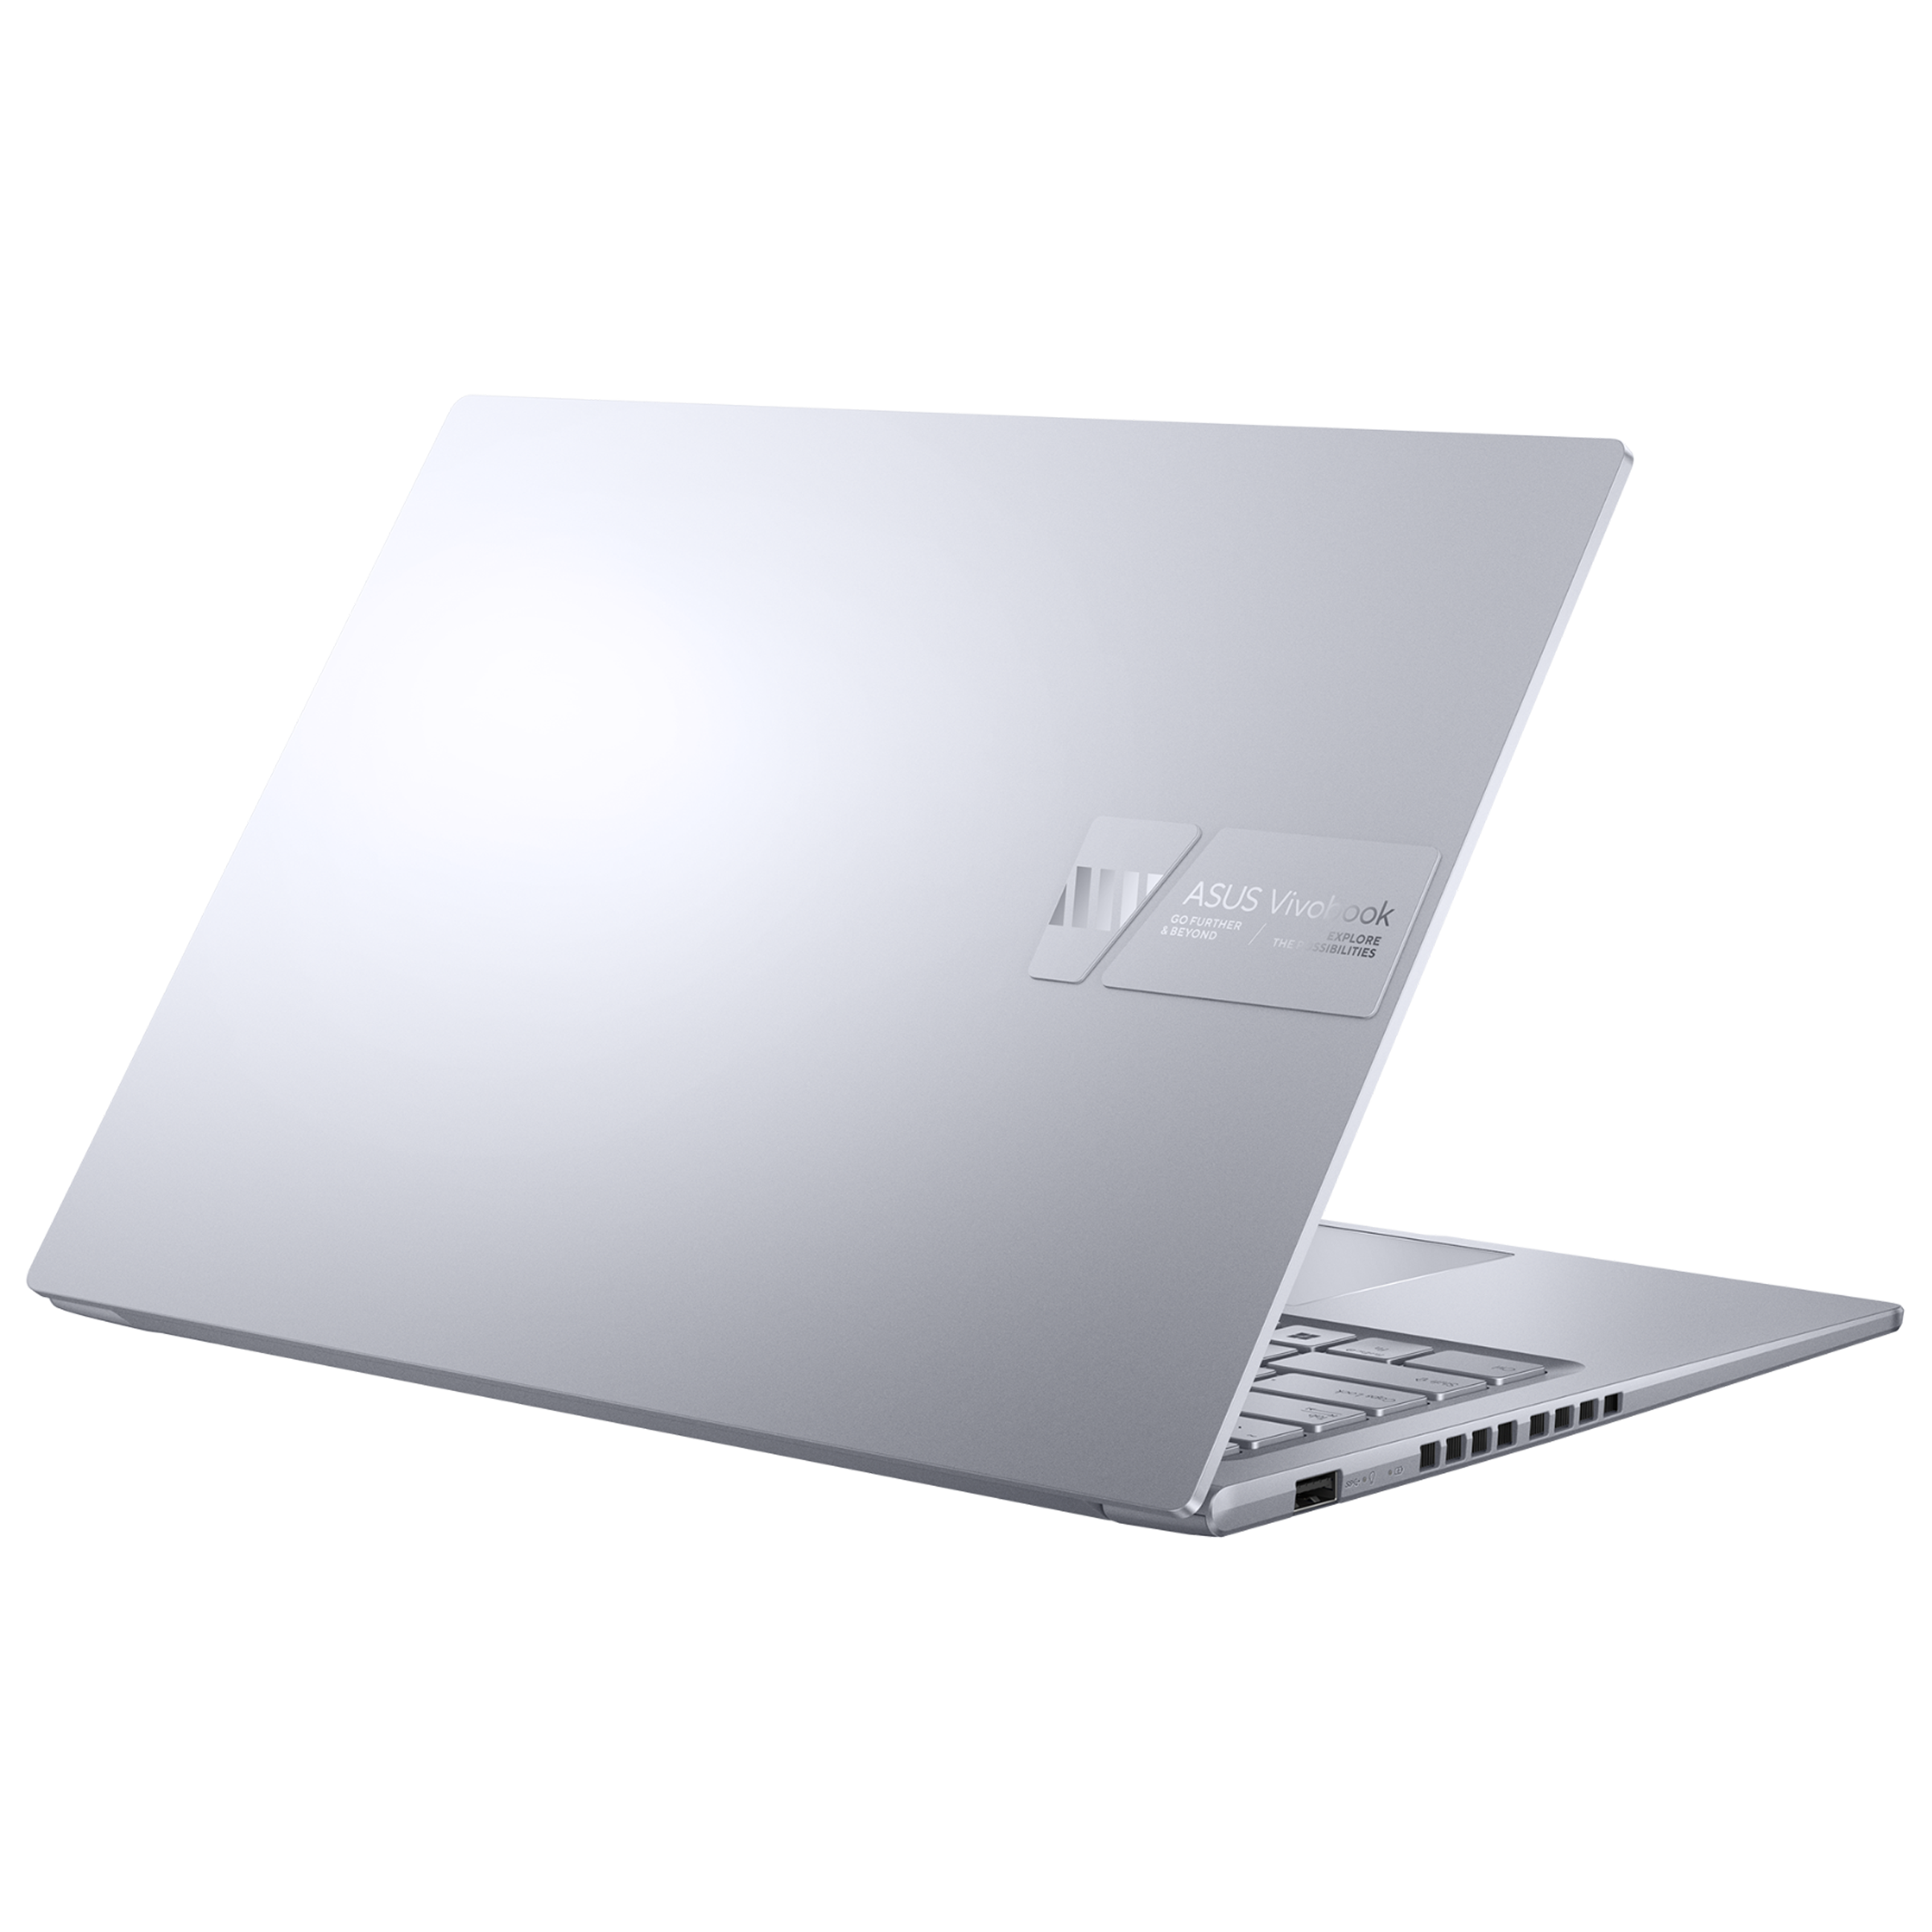 Asus Vivobook 14 Touch launched with 12th-Gen Intel SoC at INR 49,990